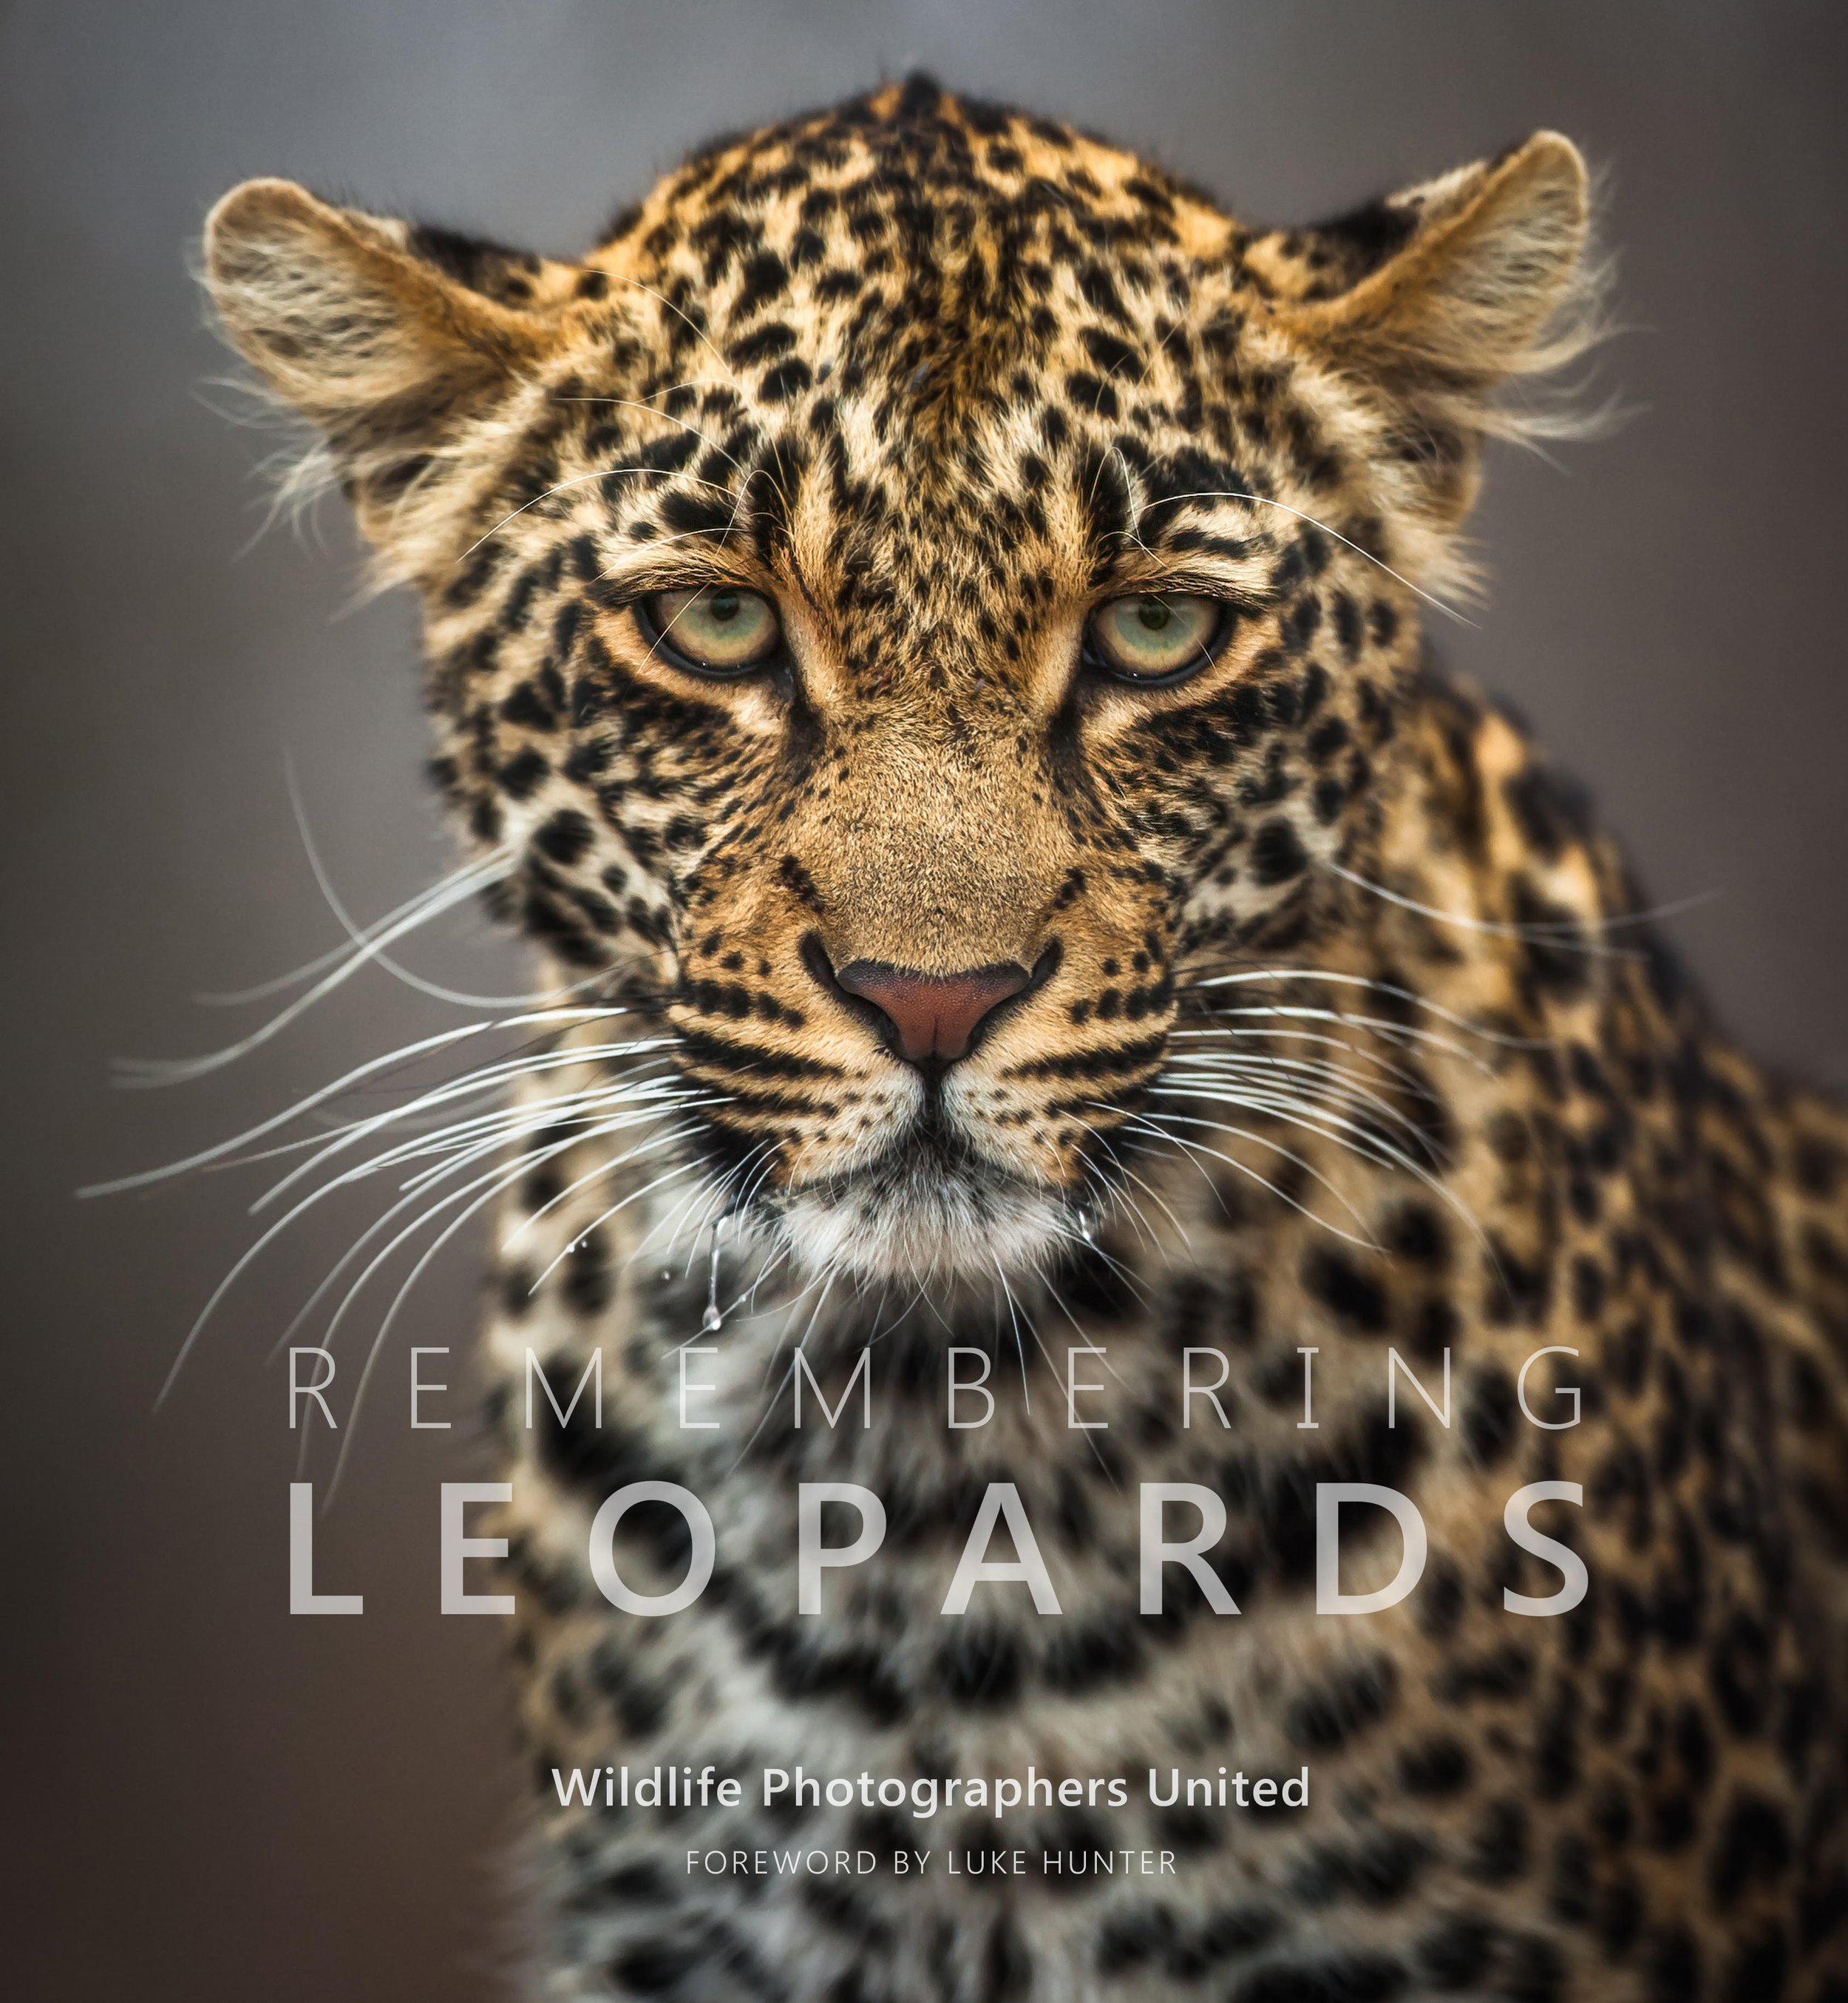 Remembering Leopards is the stunning eighth book in the Remembering Wildlife charity series.